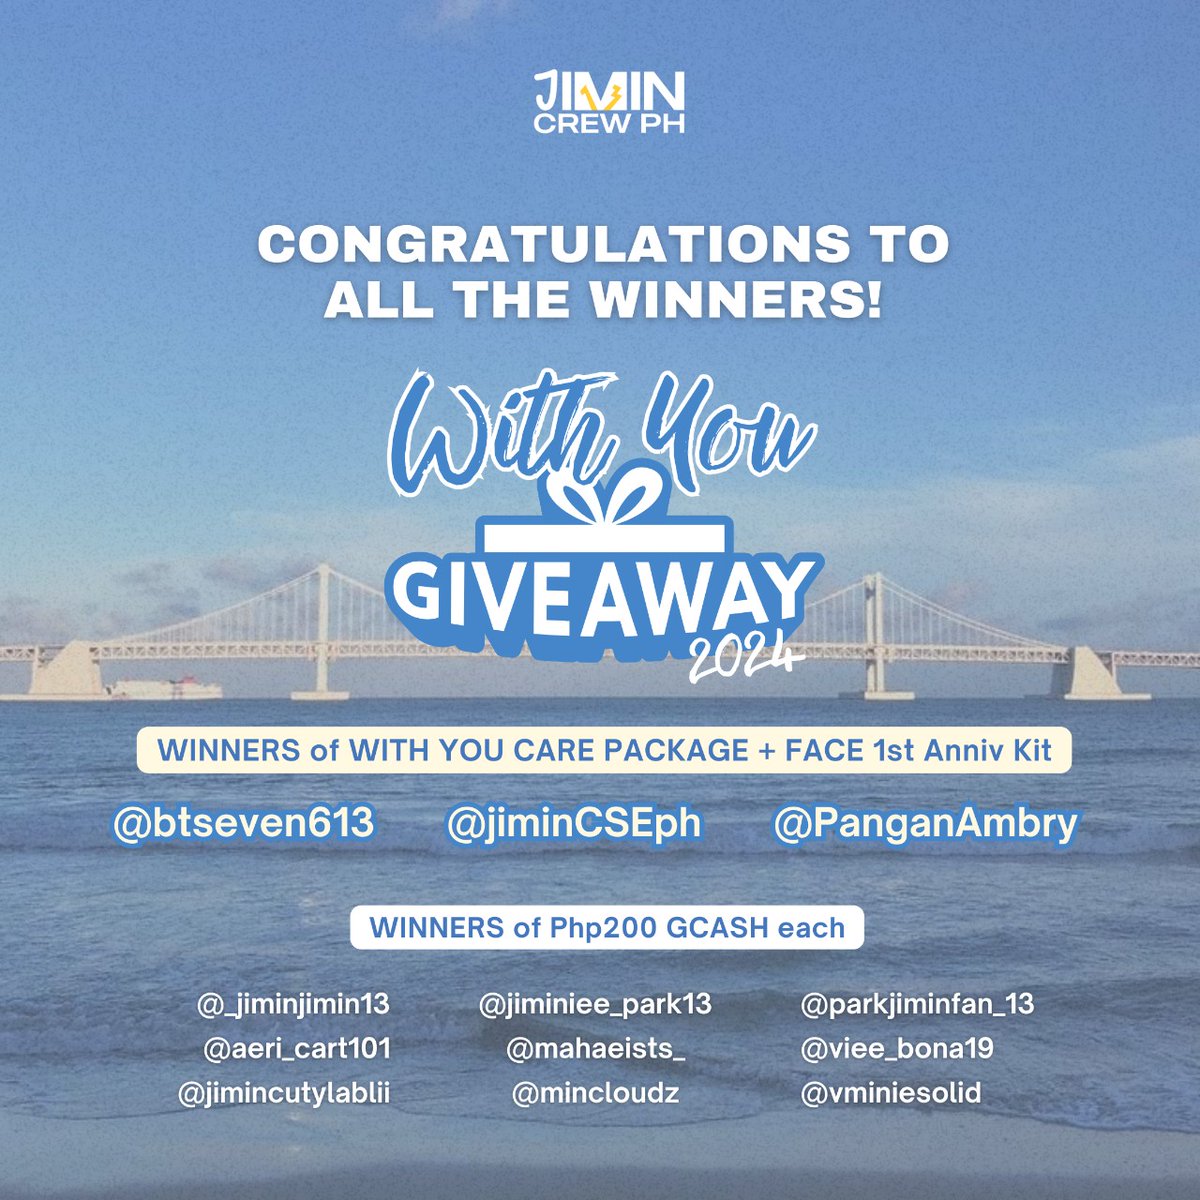 🥳 Congratulations, everyone! 

💙🎧 Thank you so much for joining our 5-day Streaming GA in celebrating 2nd Anniversary of 𝗪𝗶𝘁𝗵 𝗬𝗼𝘂 by #Jimin and Ha Sungwoon! 

📬 Winners must send a DM to @withjimincrewph within 13hrs. Tysm!

#2YearsWithYouJIMIN
#winwithjmcph